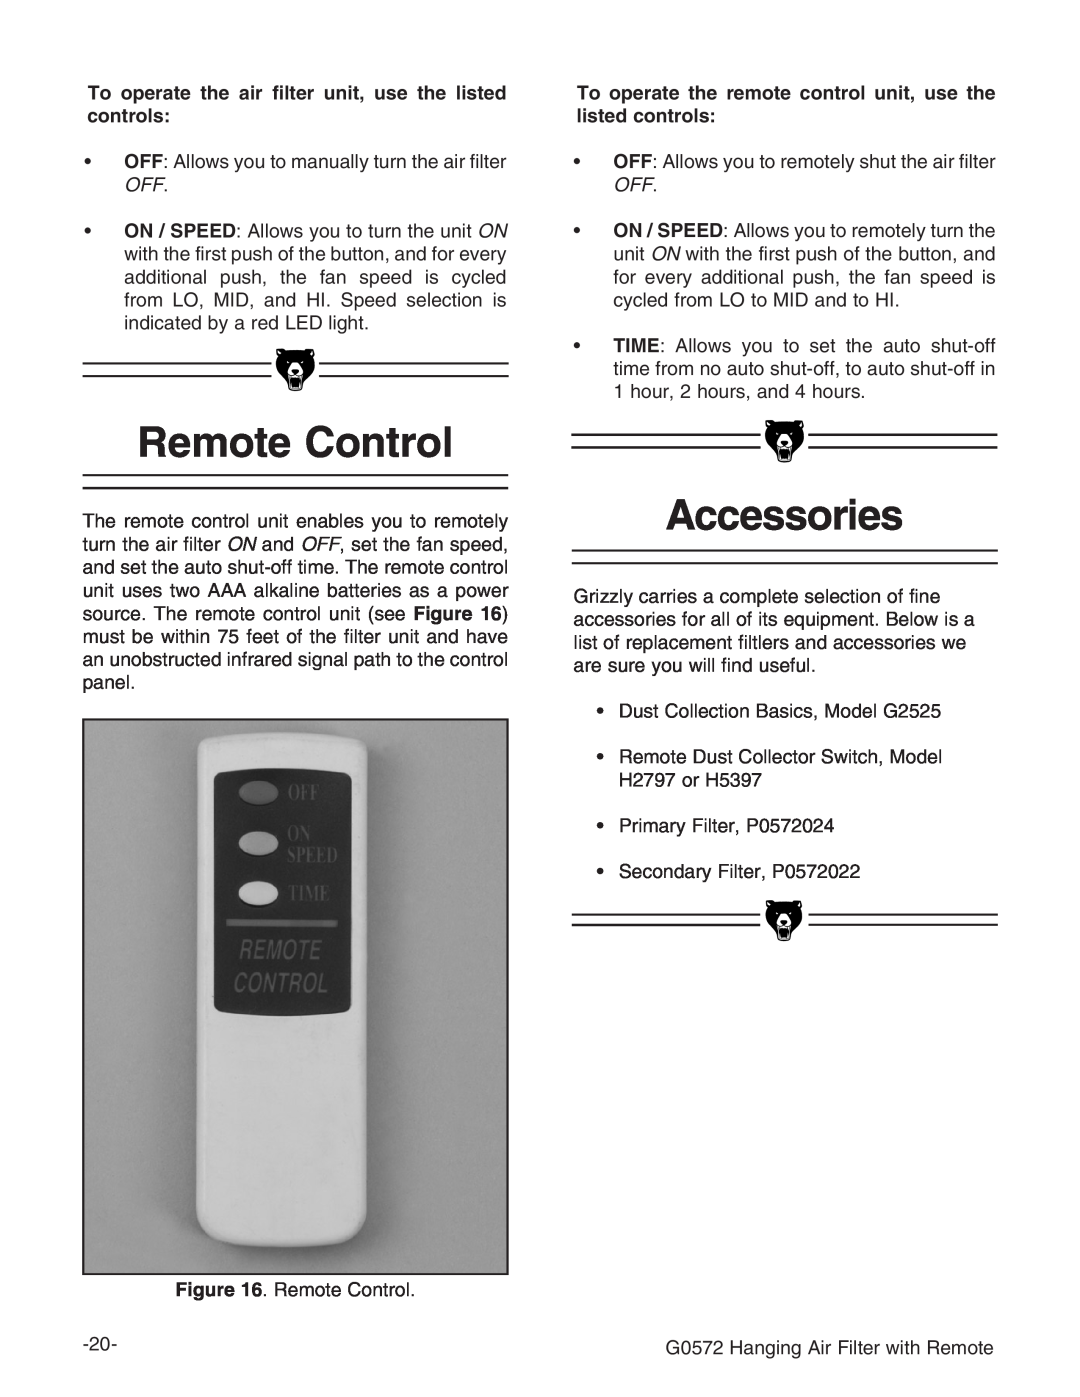 Grizzly G0572 instruction manual Remote Control, Accessories 